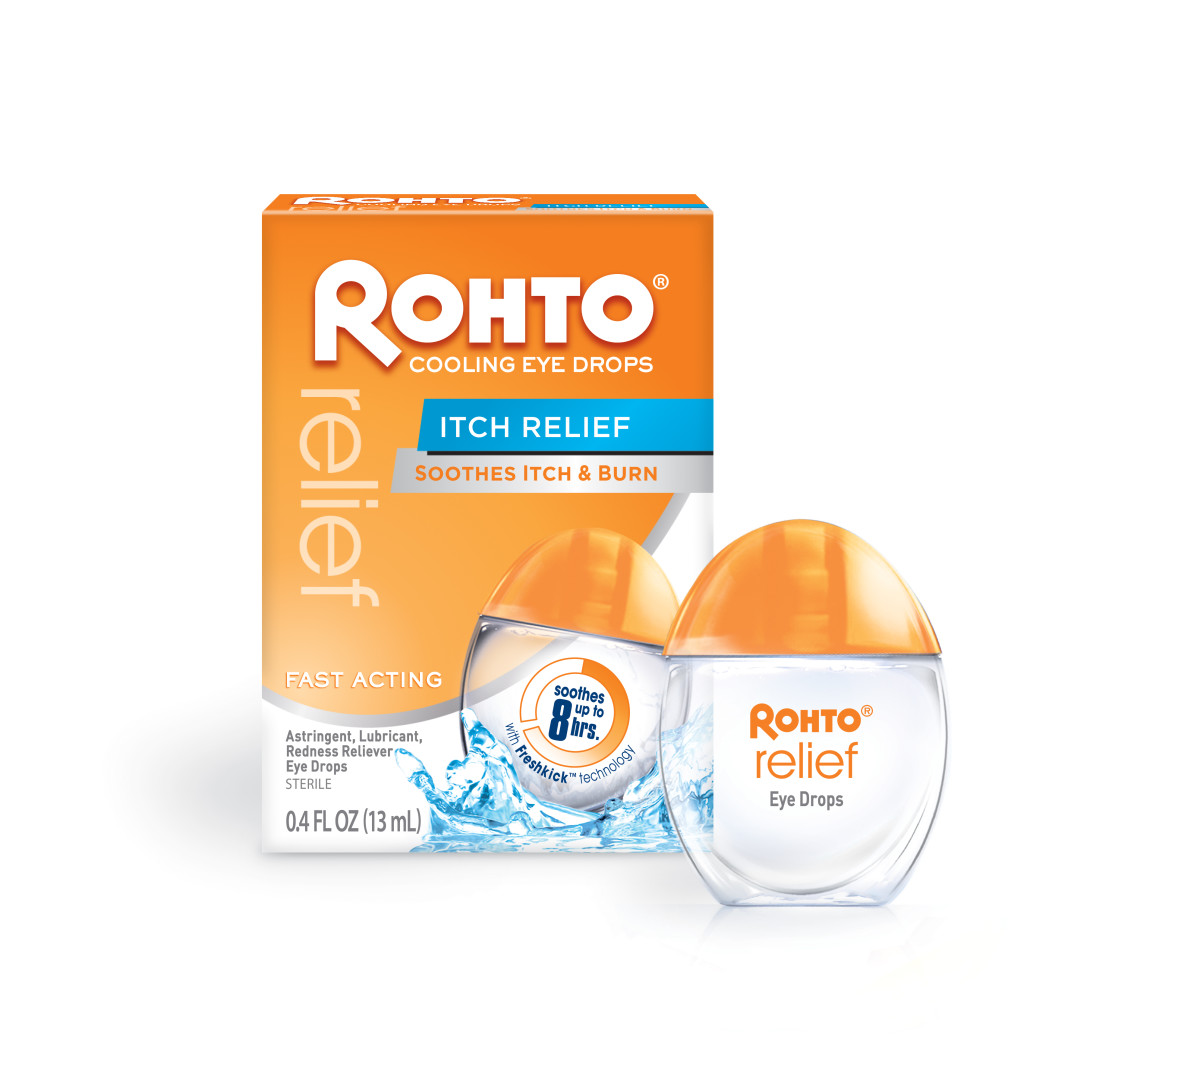 Rohto® Relief Cooling Eye Drops